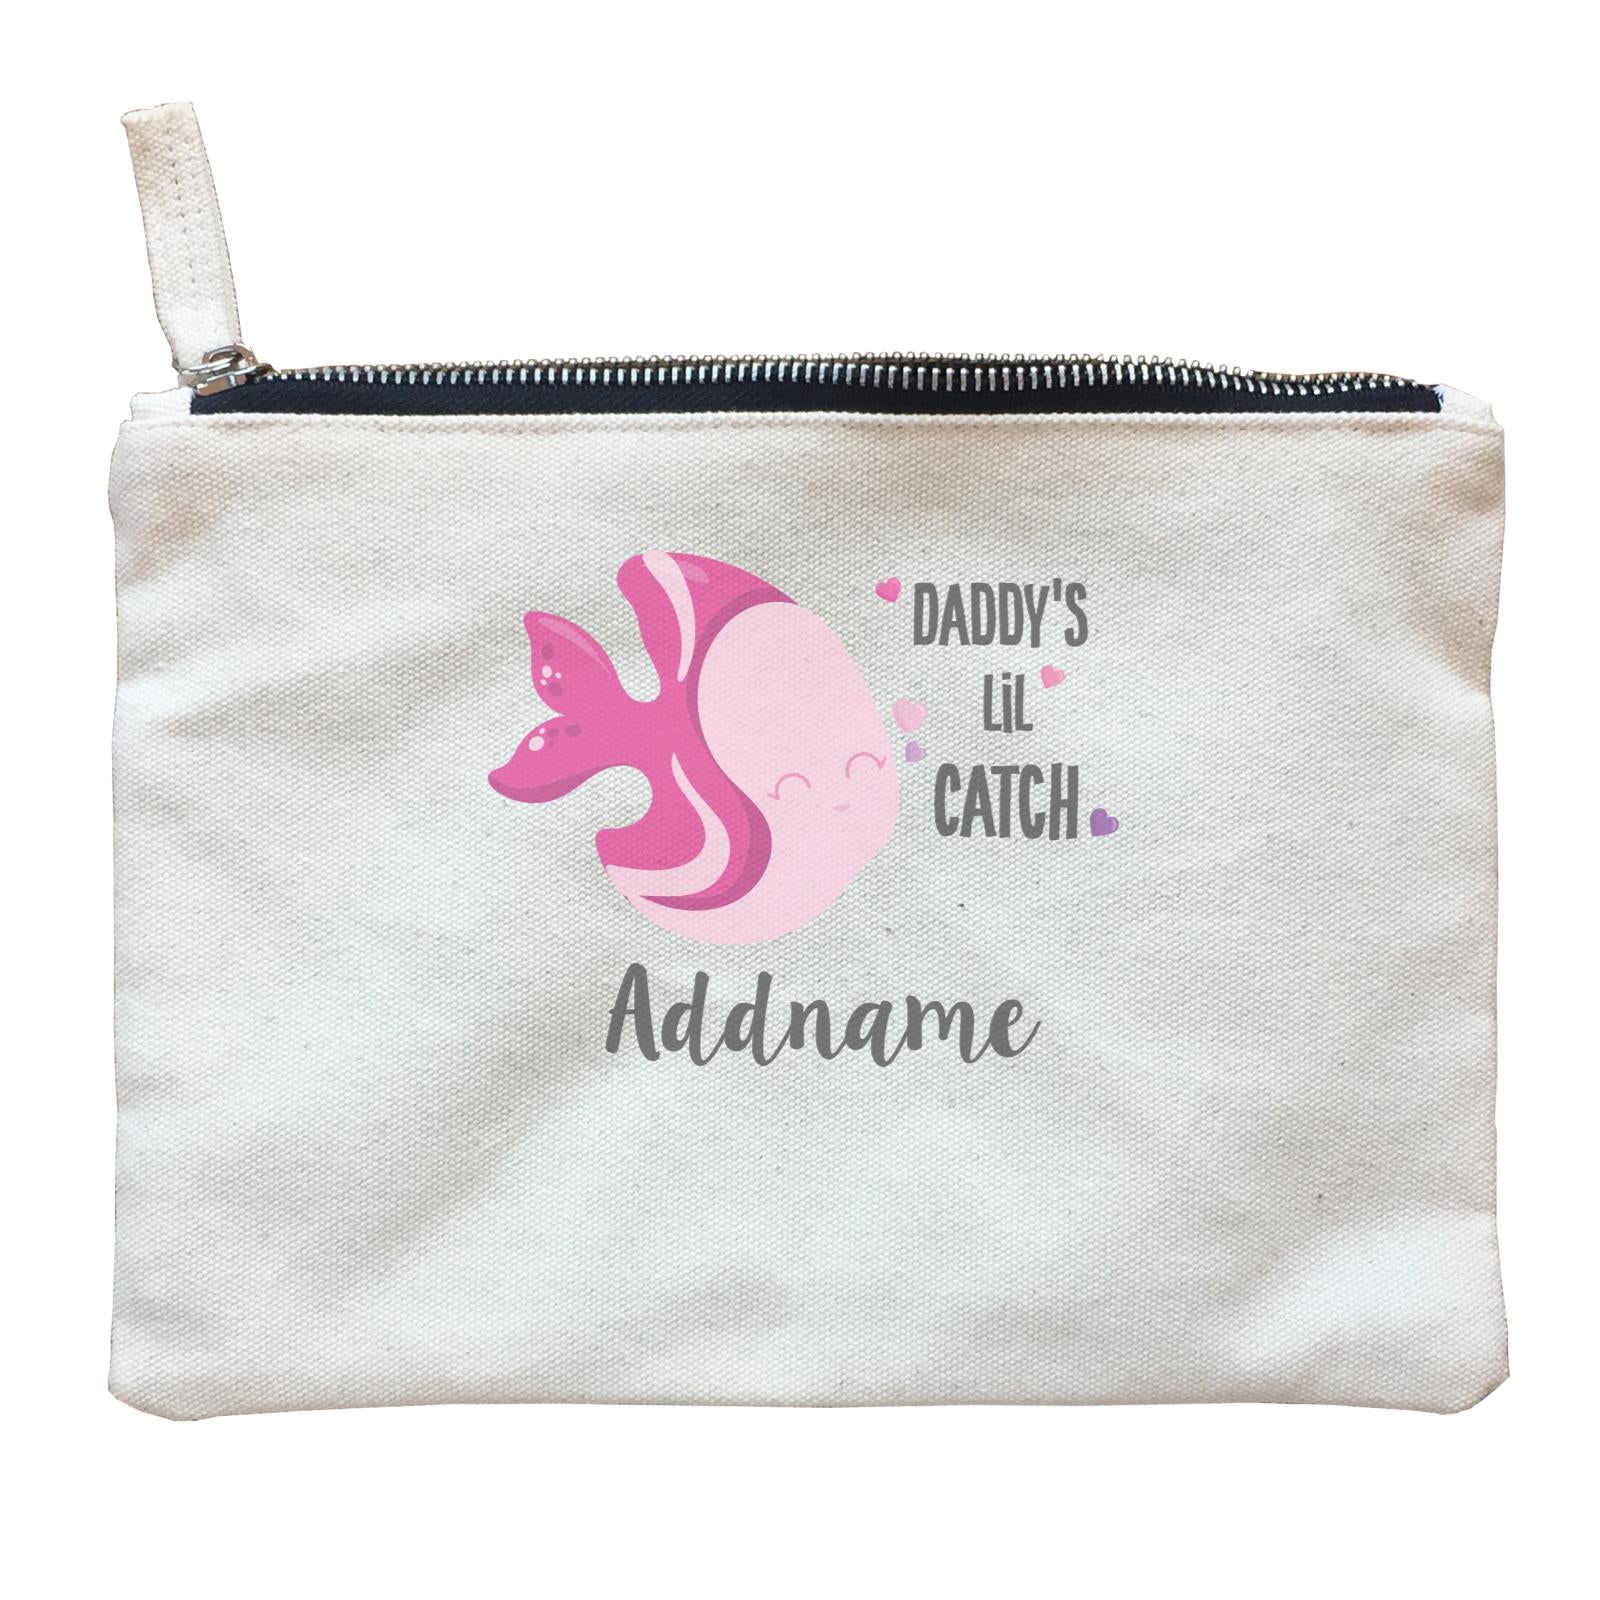 Cute Sea Animals Pink Fish Daddy's Lil Catch Addname Zipper Pouch